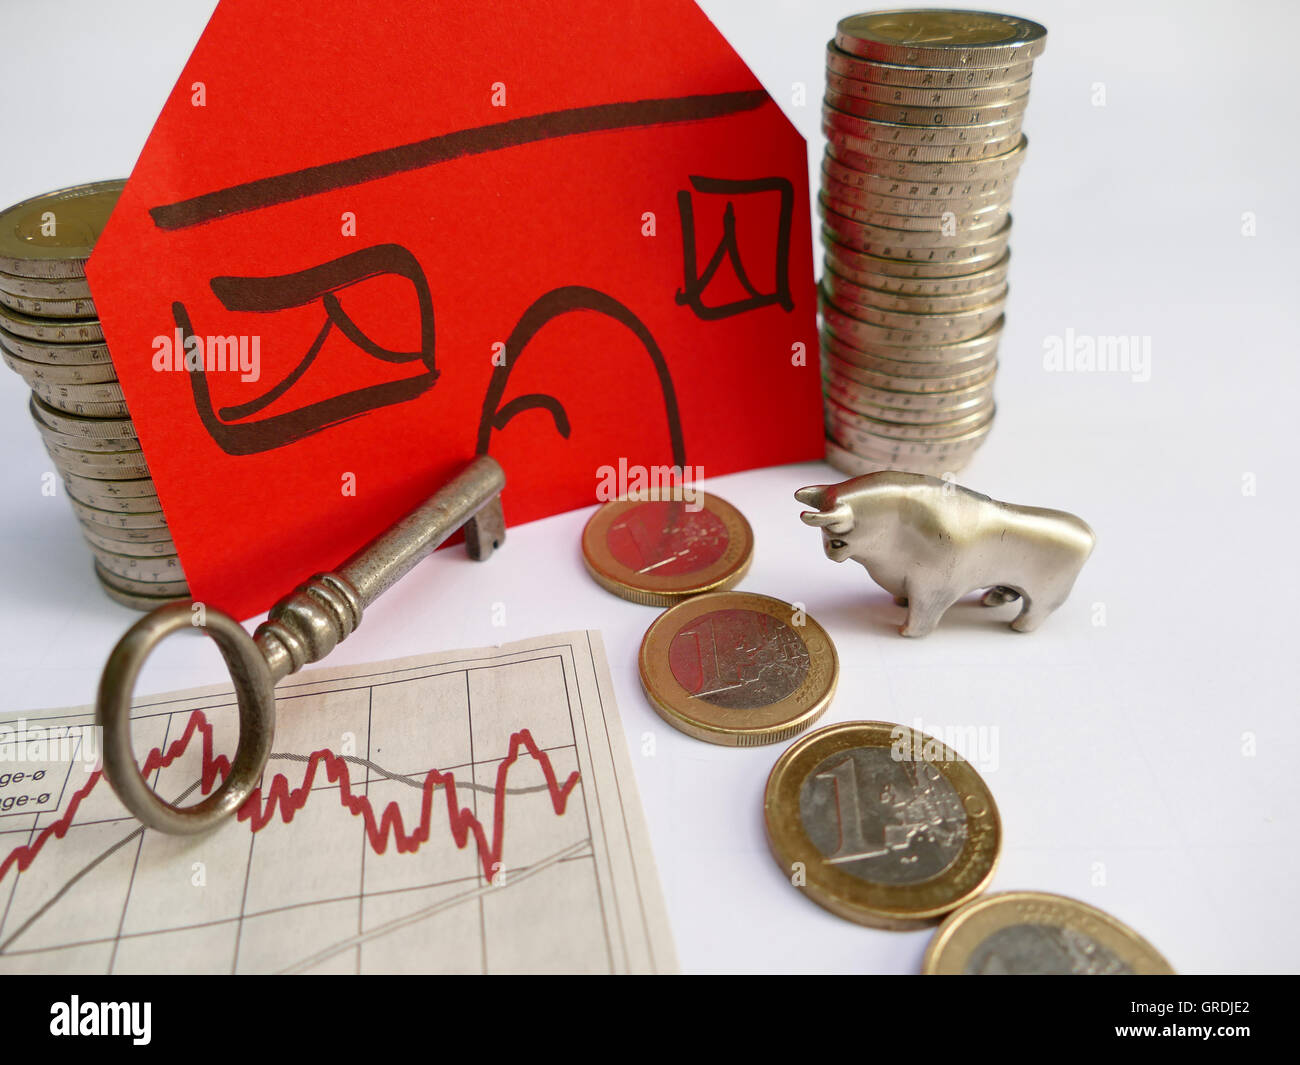 Symbol Photo Buying A House, Here House Financing With Share Earnings Stock Photo